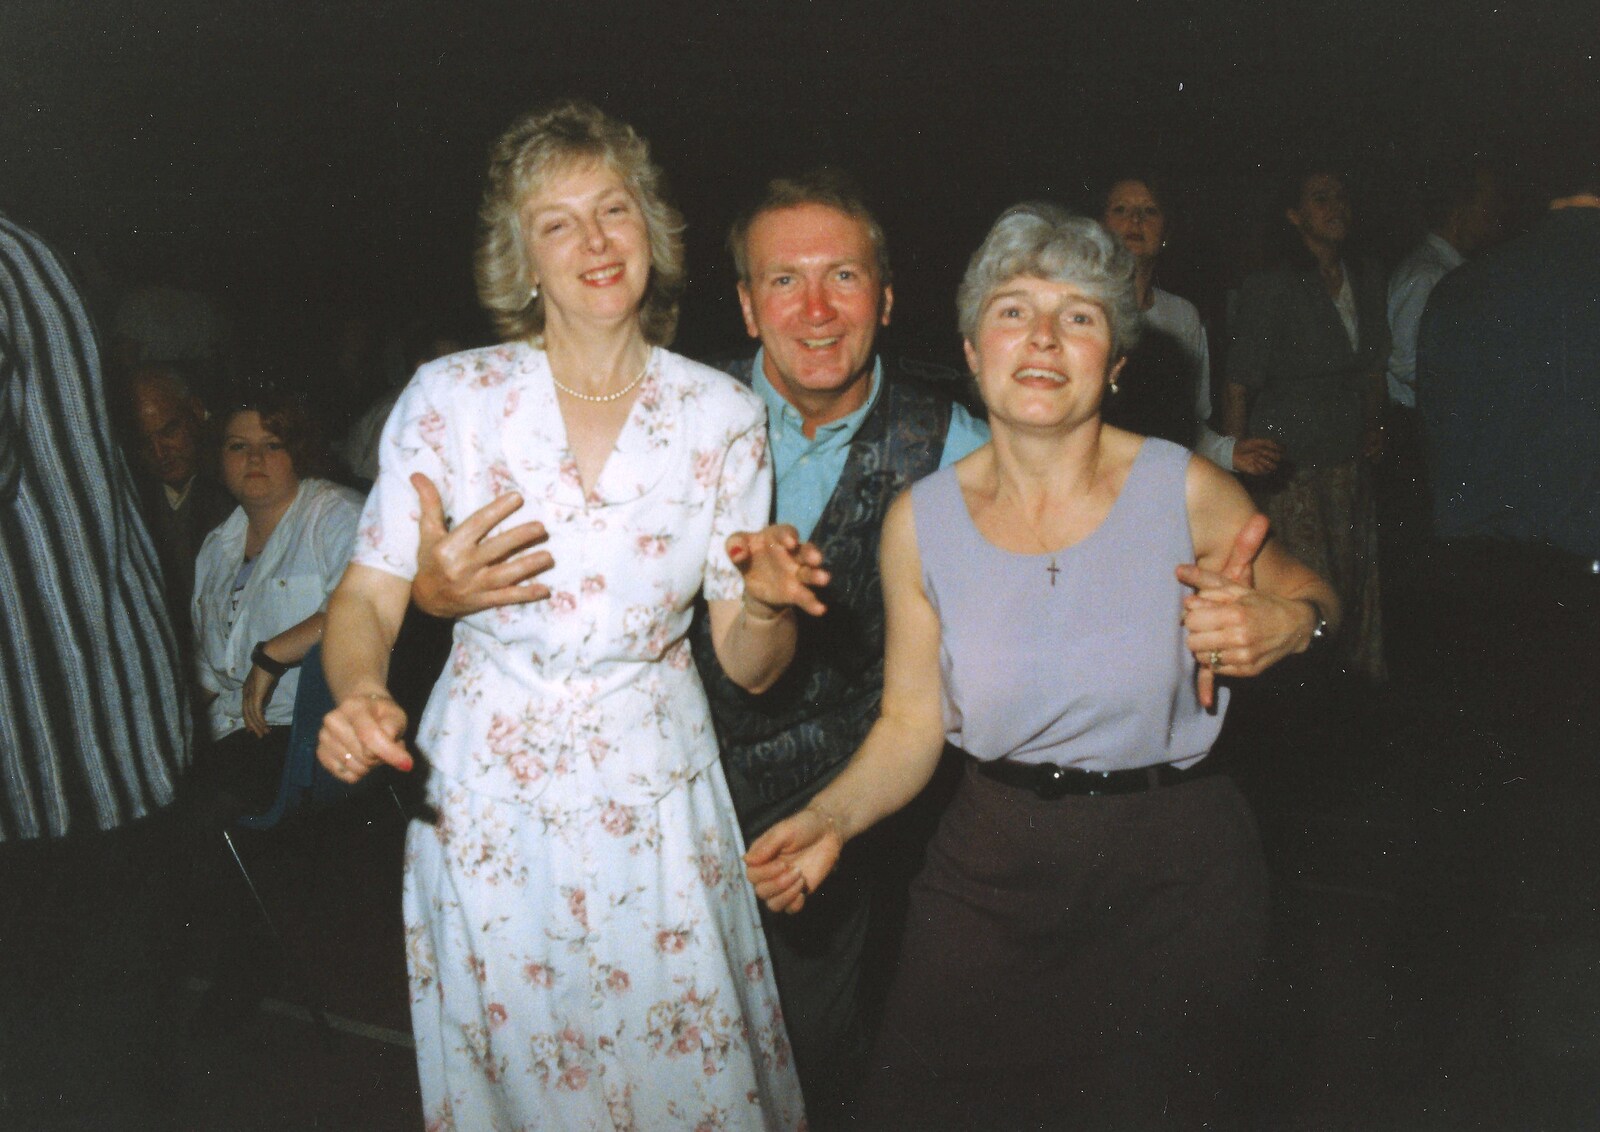 Jean, John Willy and Spam from Debbie's Wedding, Suffolk - 12th June 1999